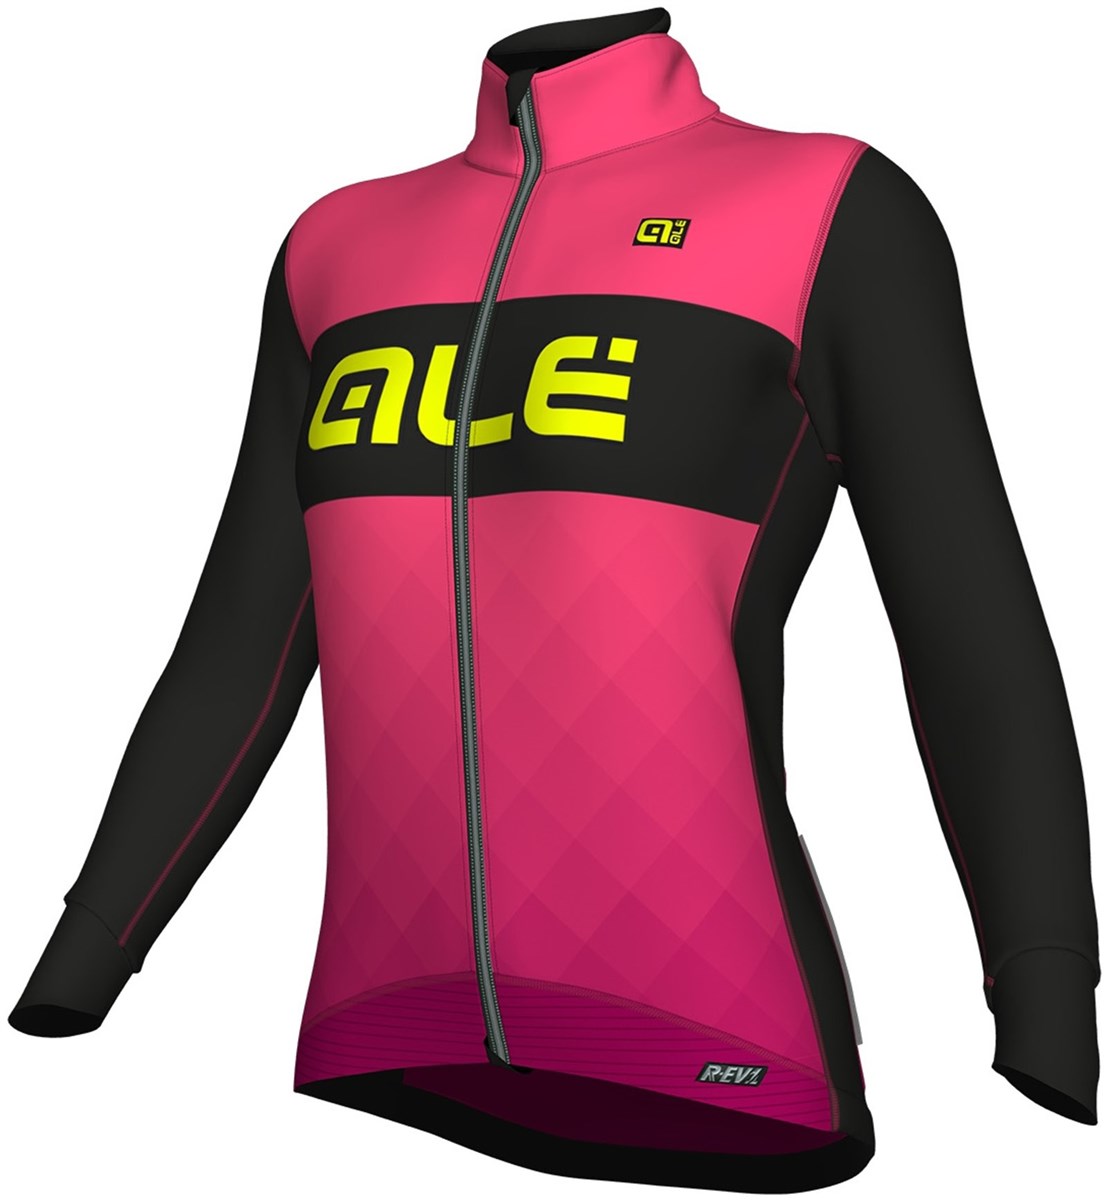 Ale R-Ev1 Rumbles Womens Jacket AW17 product image